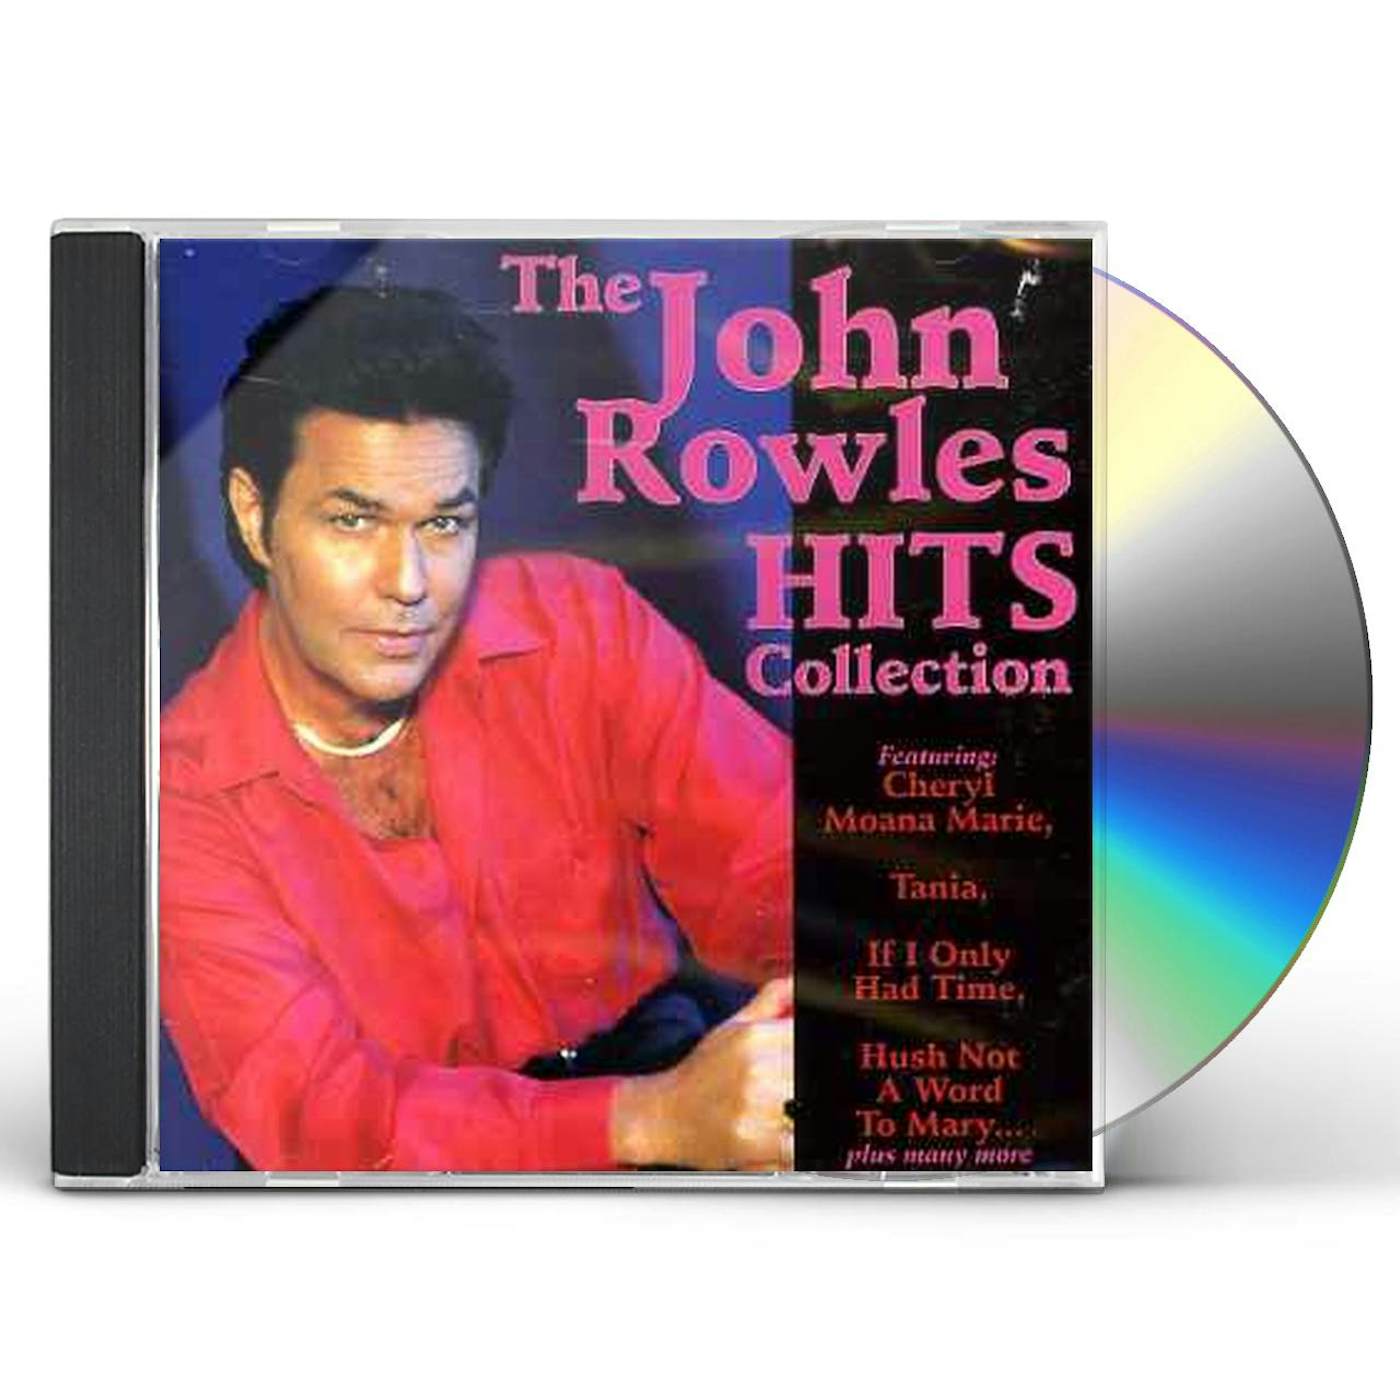 John Rowles HIT COLLECTION CD